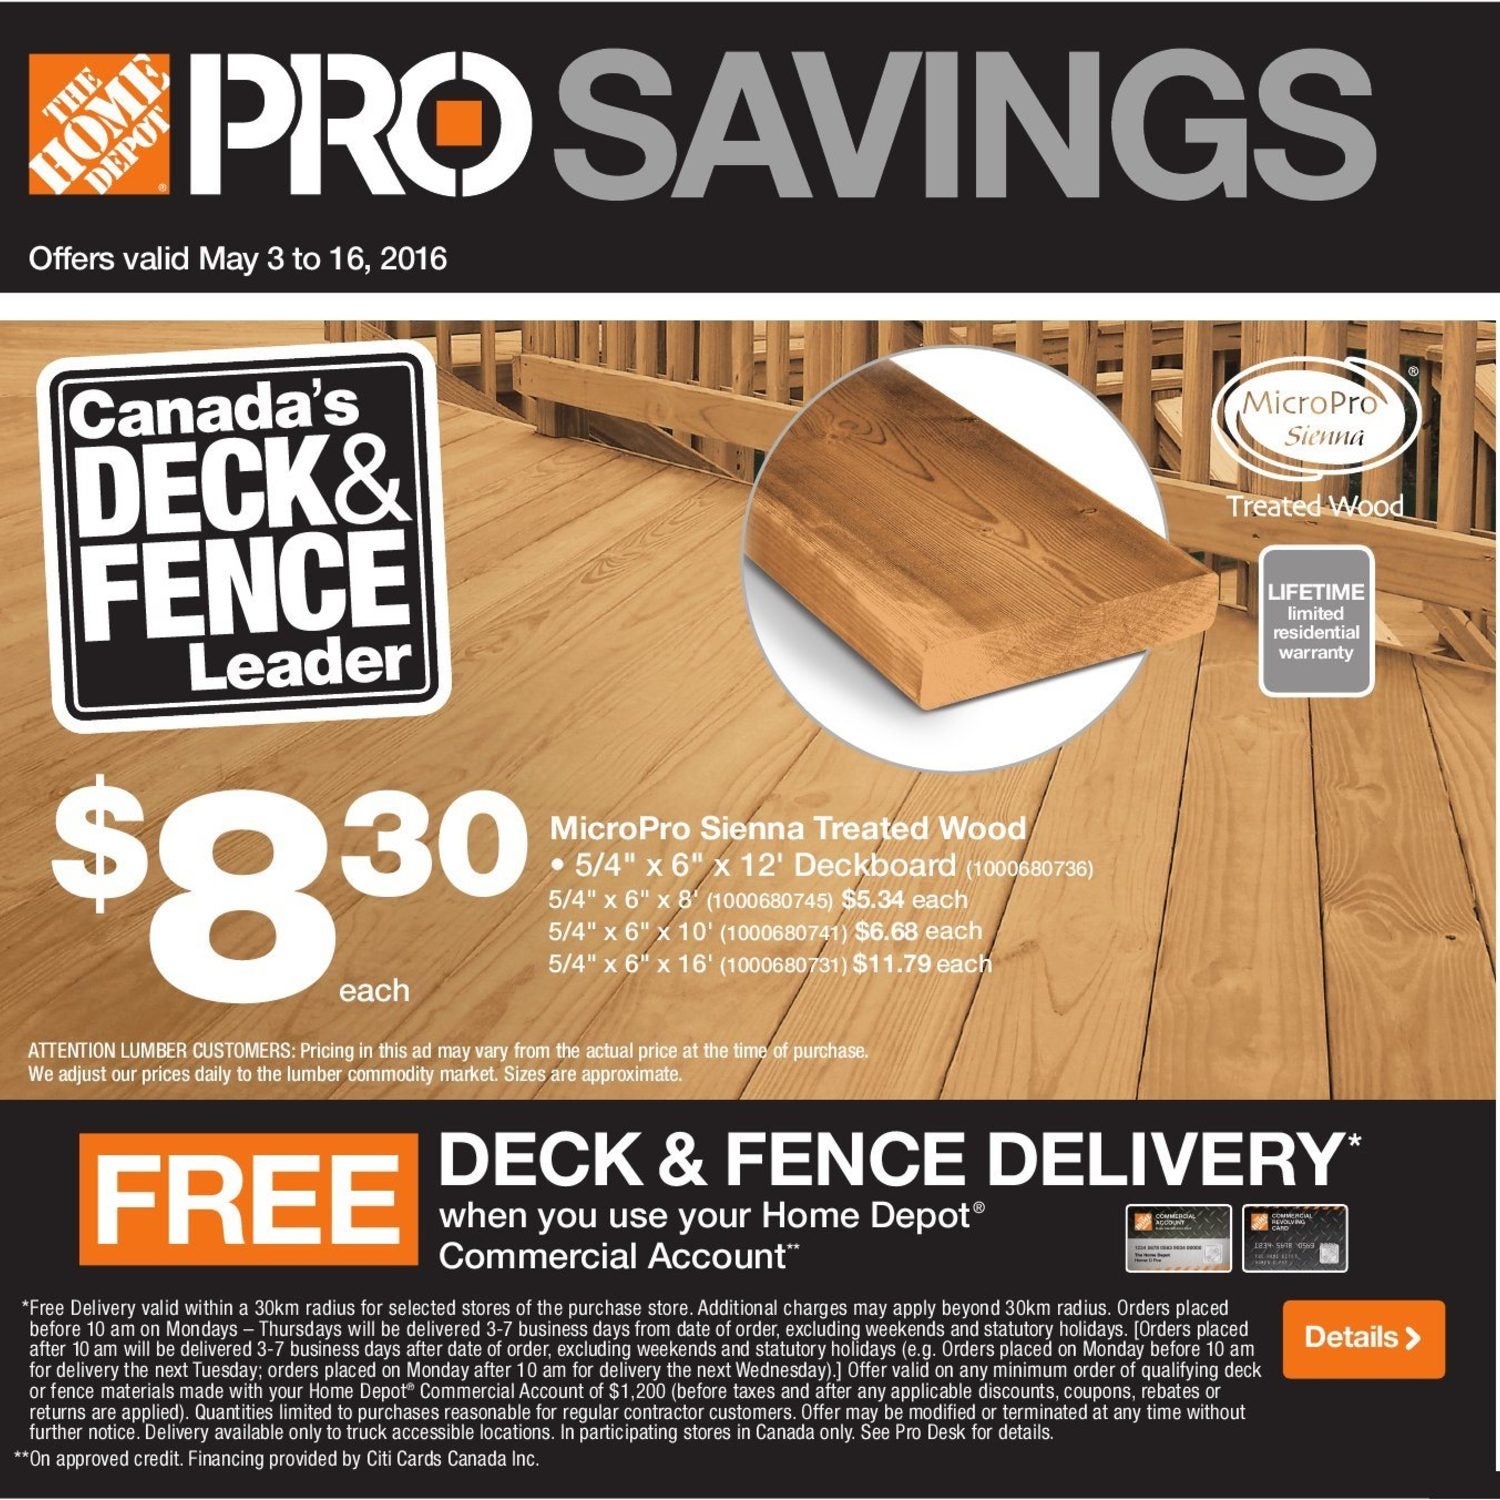 Home Depot Weekly Flyer Pro Savings May 3 – 16 RedFlagDeals